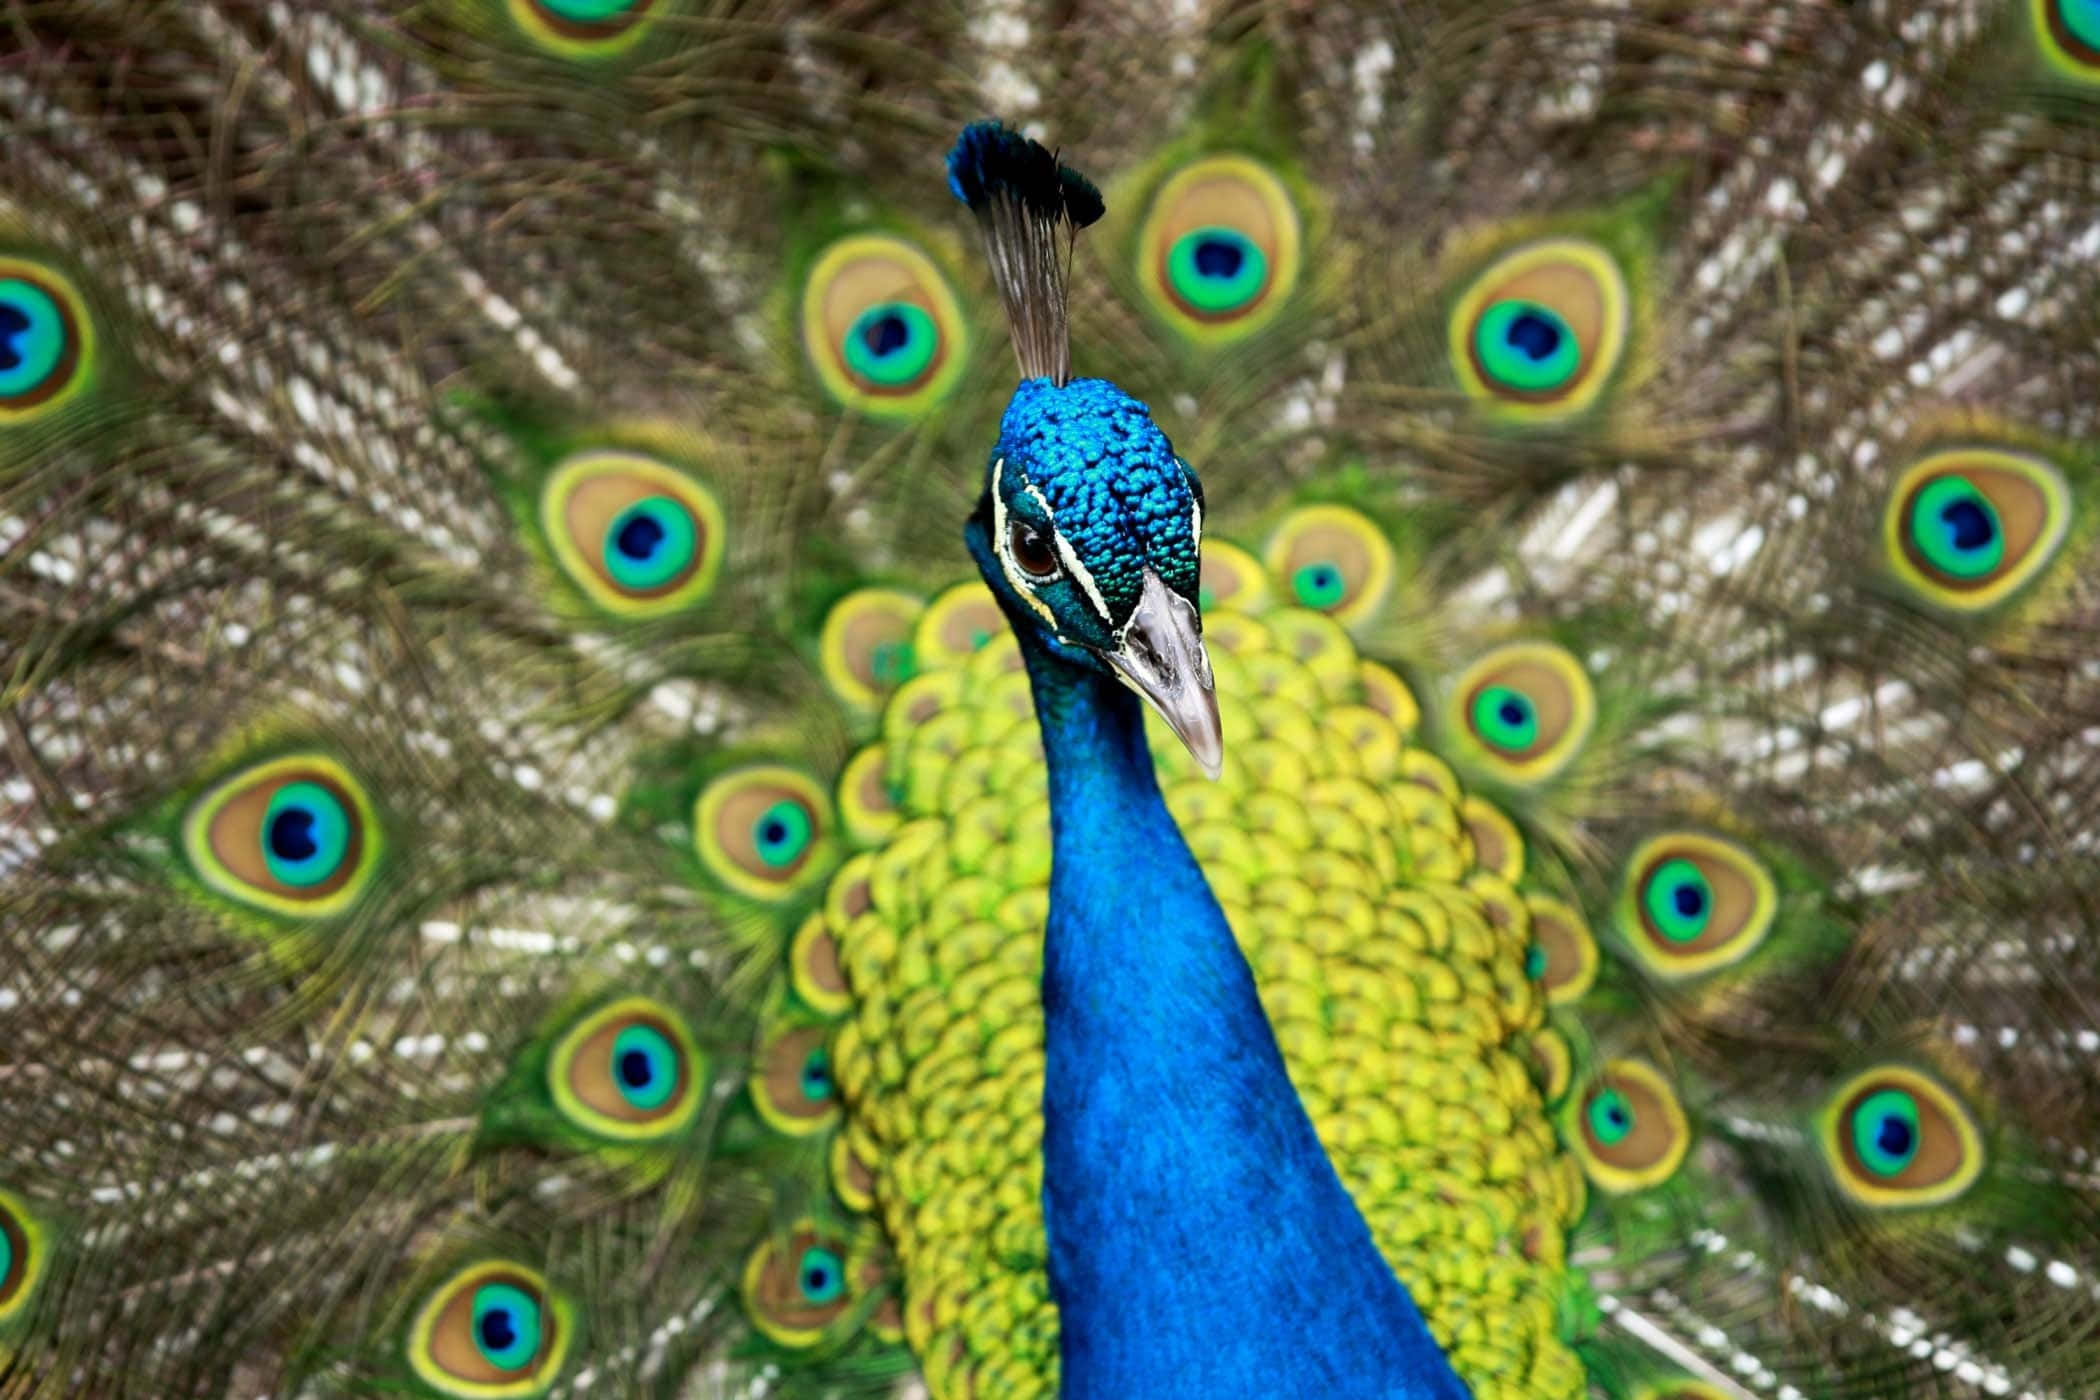 A vibrant peacock peers out from its feathers.